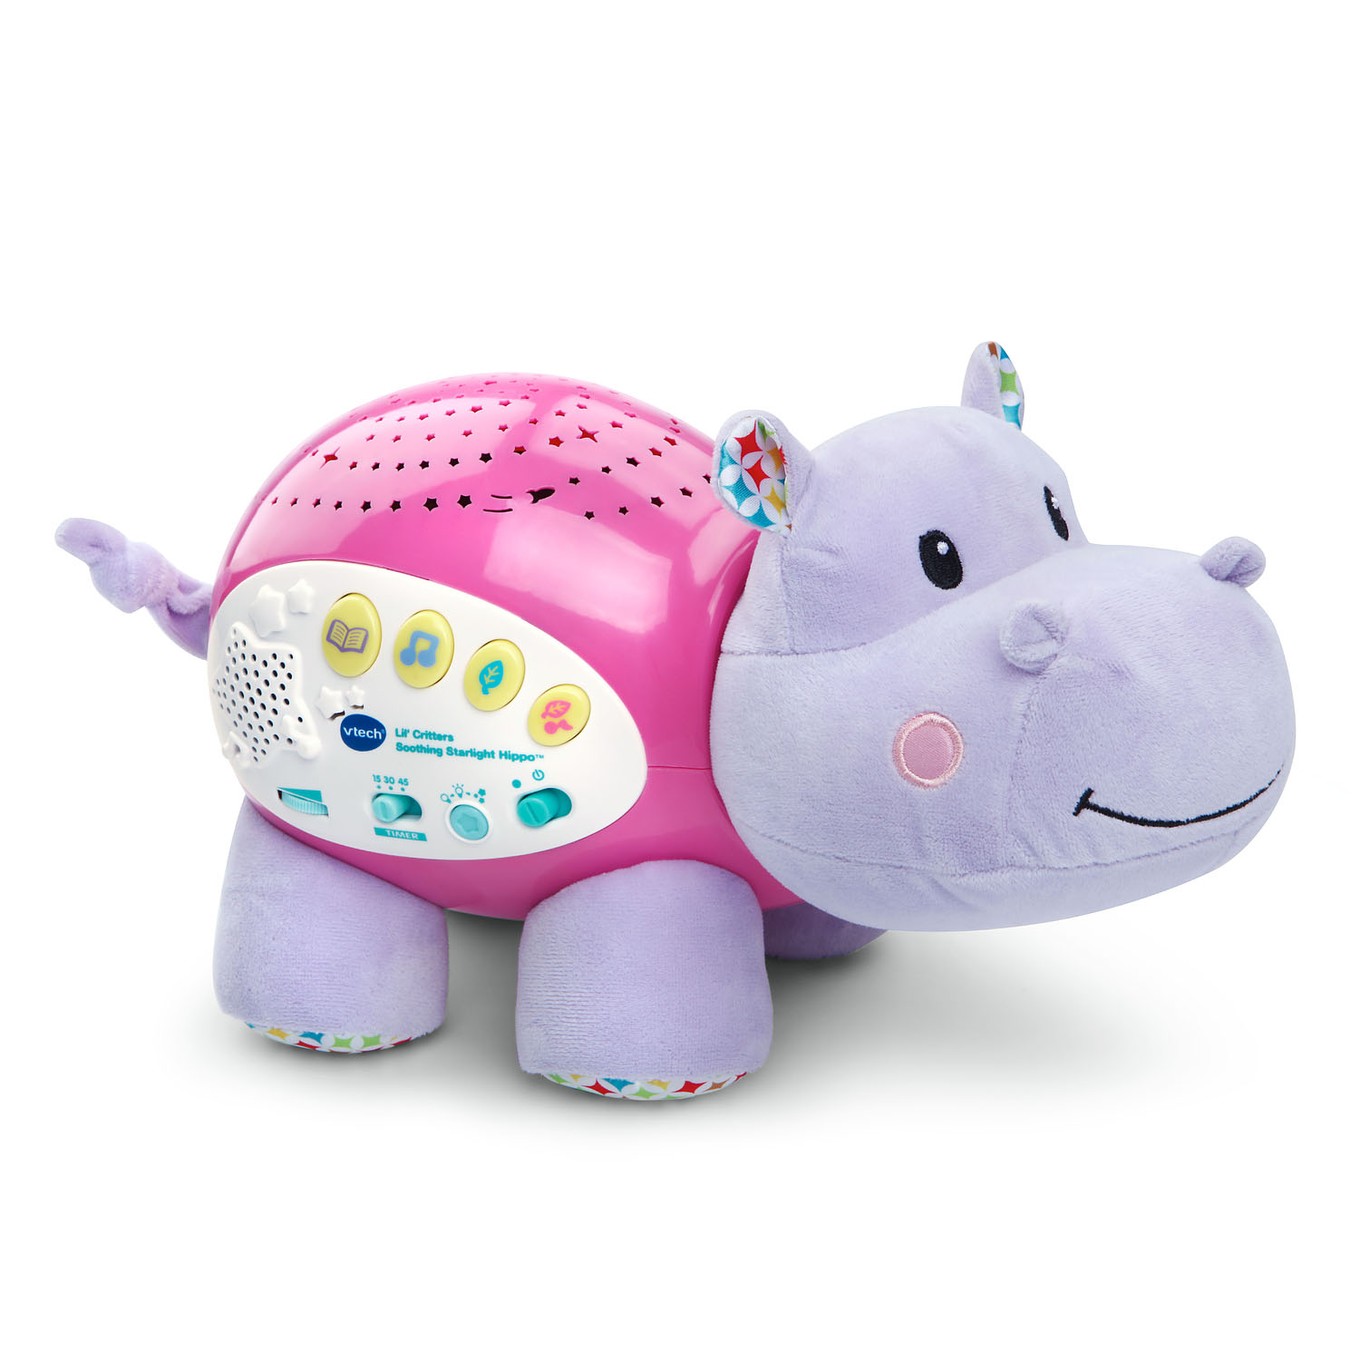 0 - 2 years VTech Baby Lil' Critters Soothing Starlight Hippo, Blue